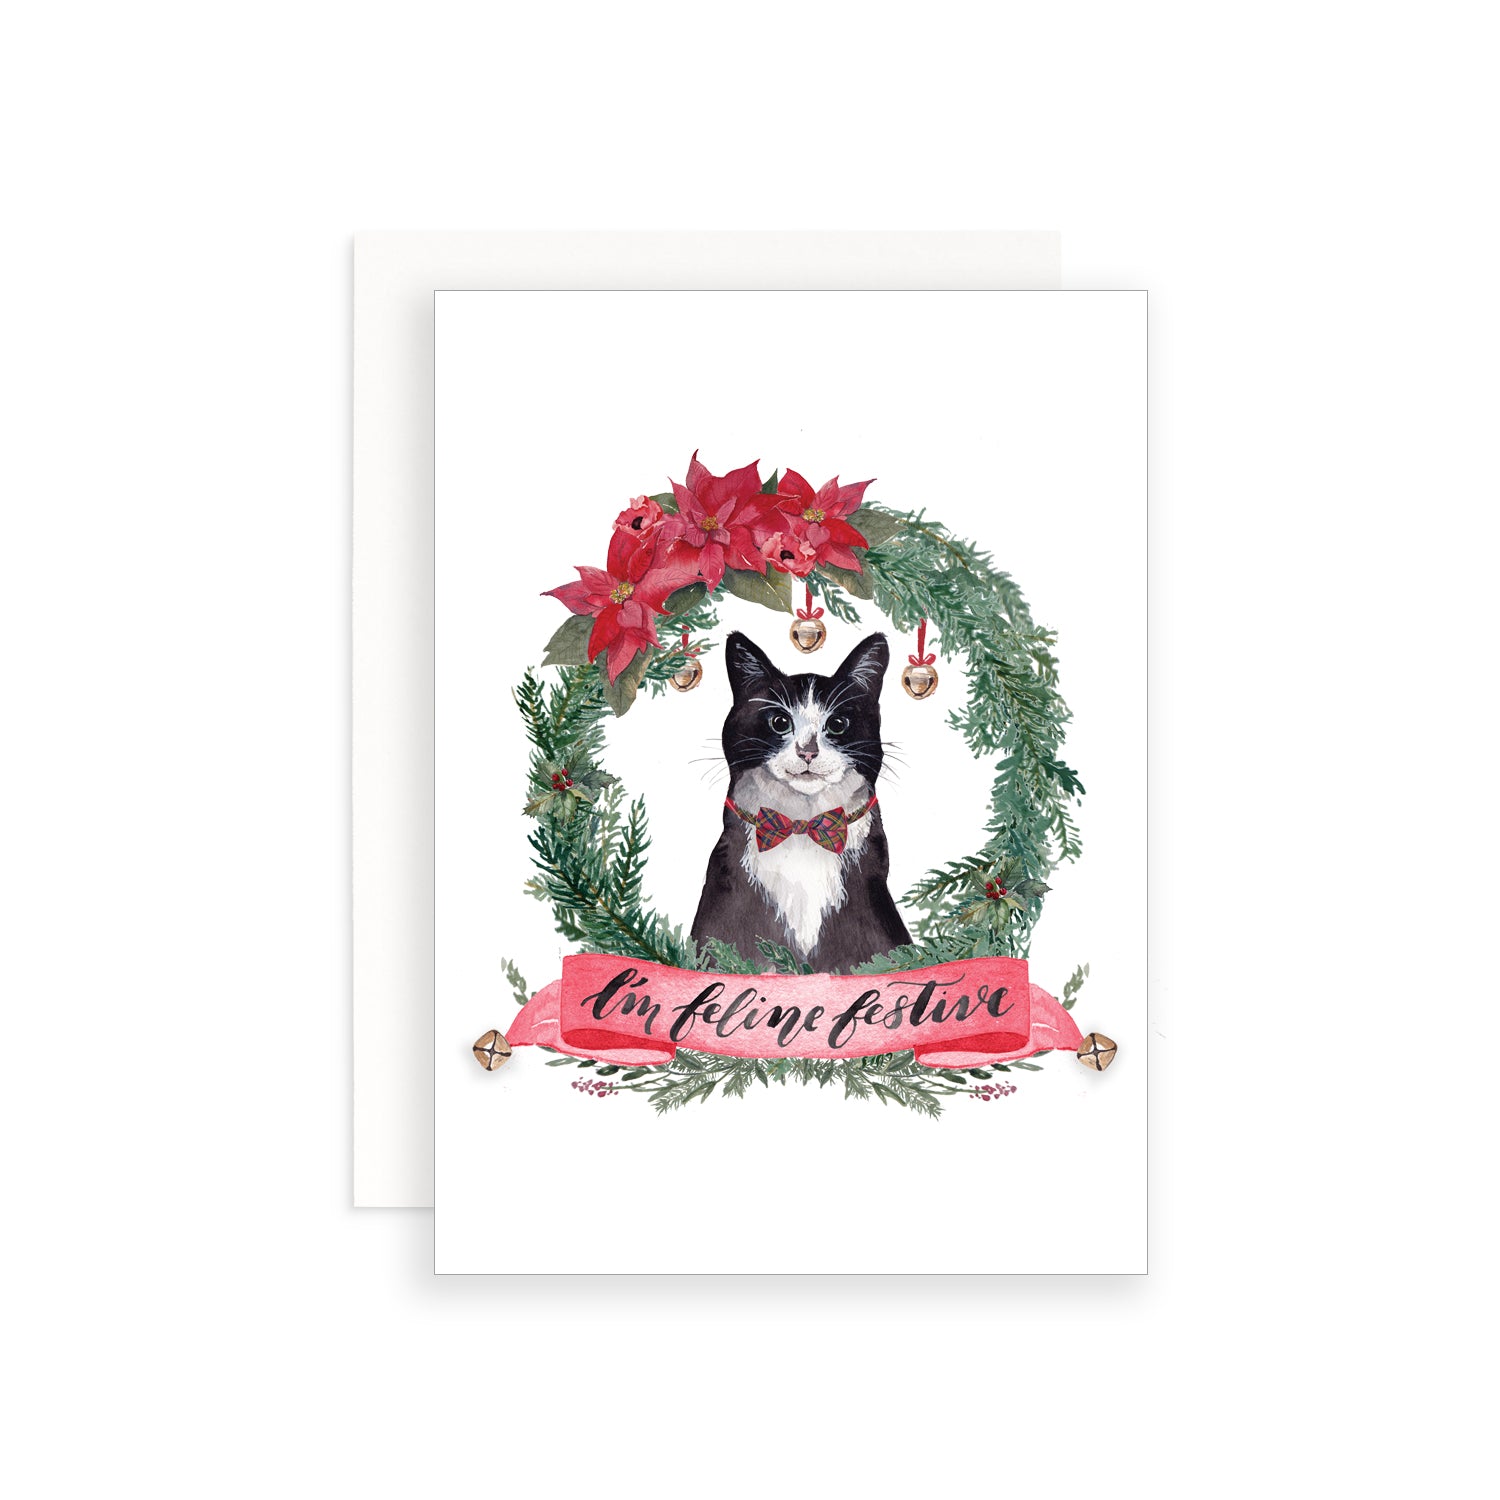 Sorry This Isn't a Puppy Gift Tags – Cami Monet